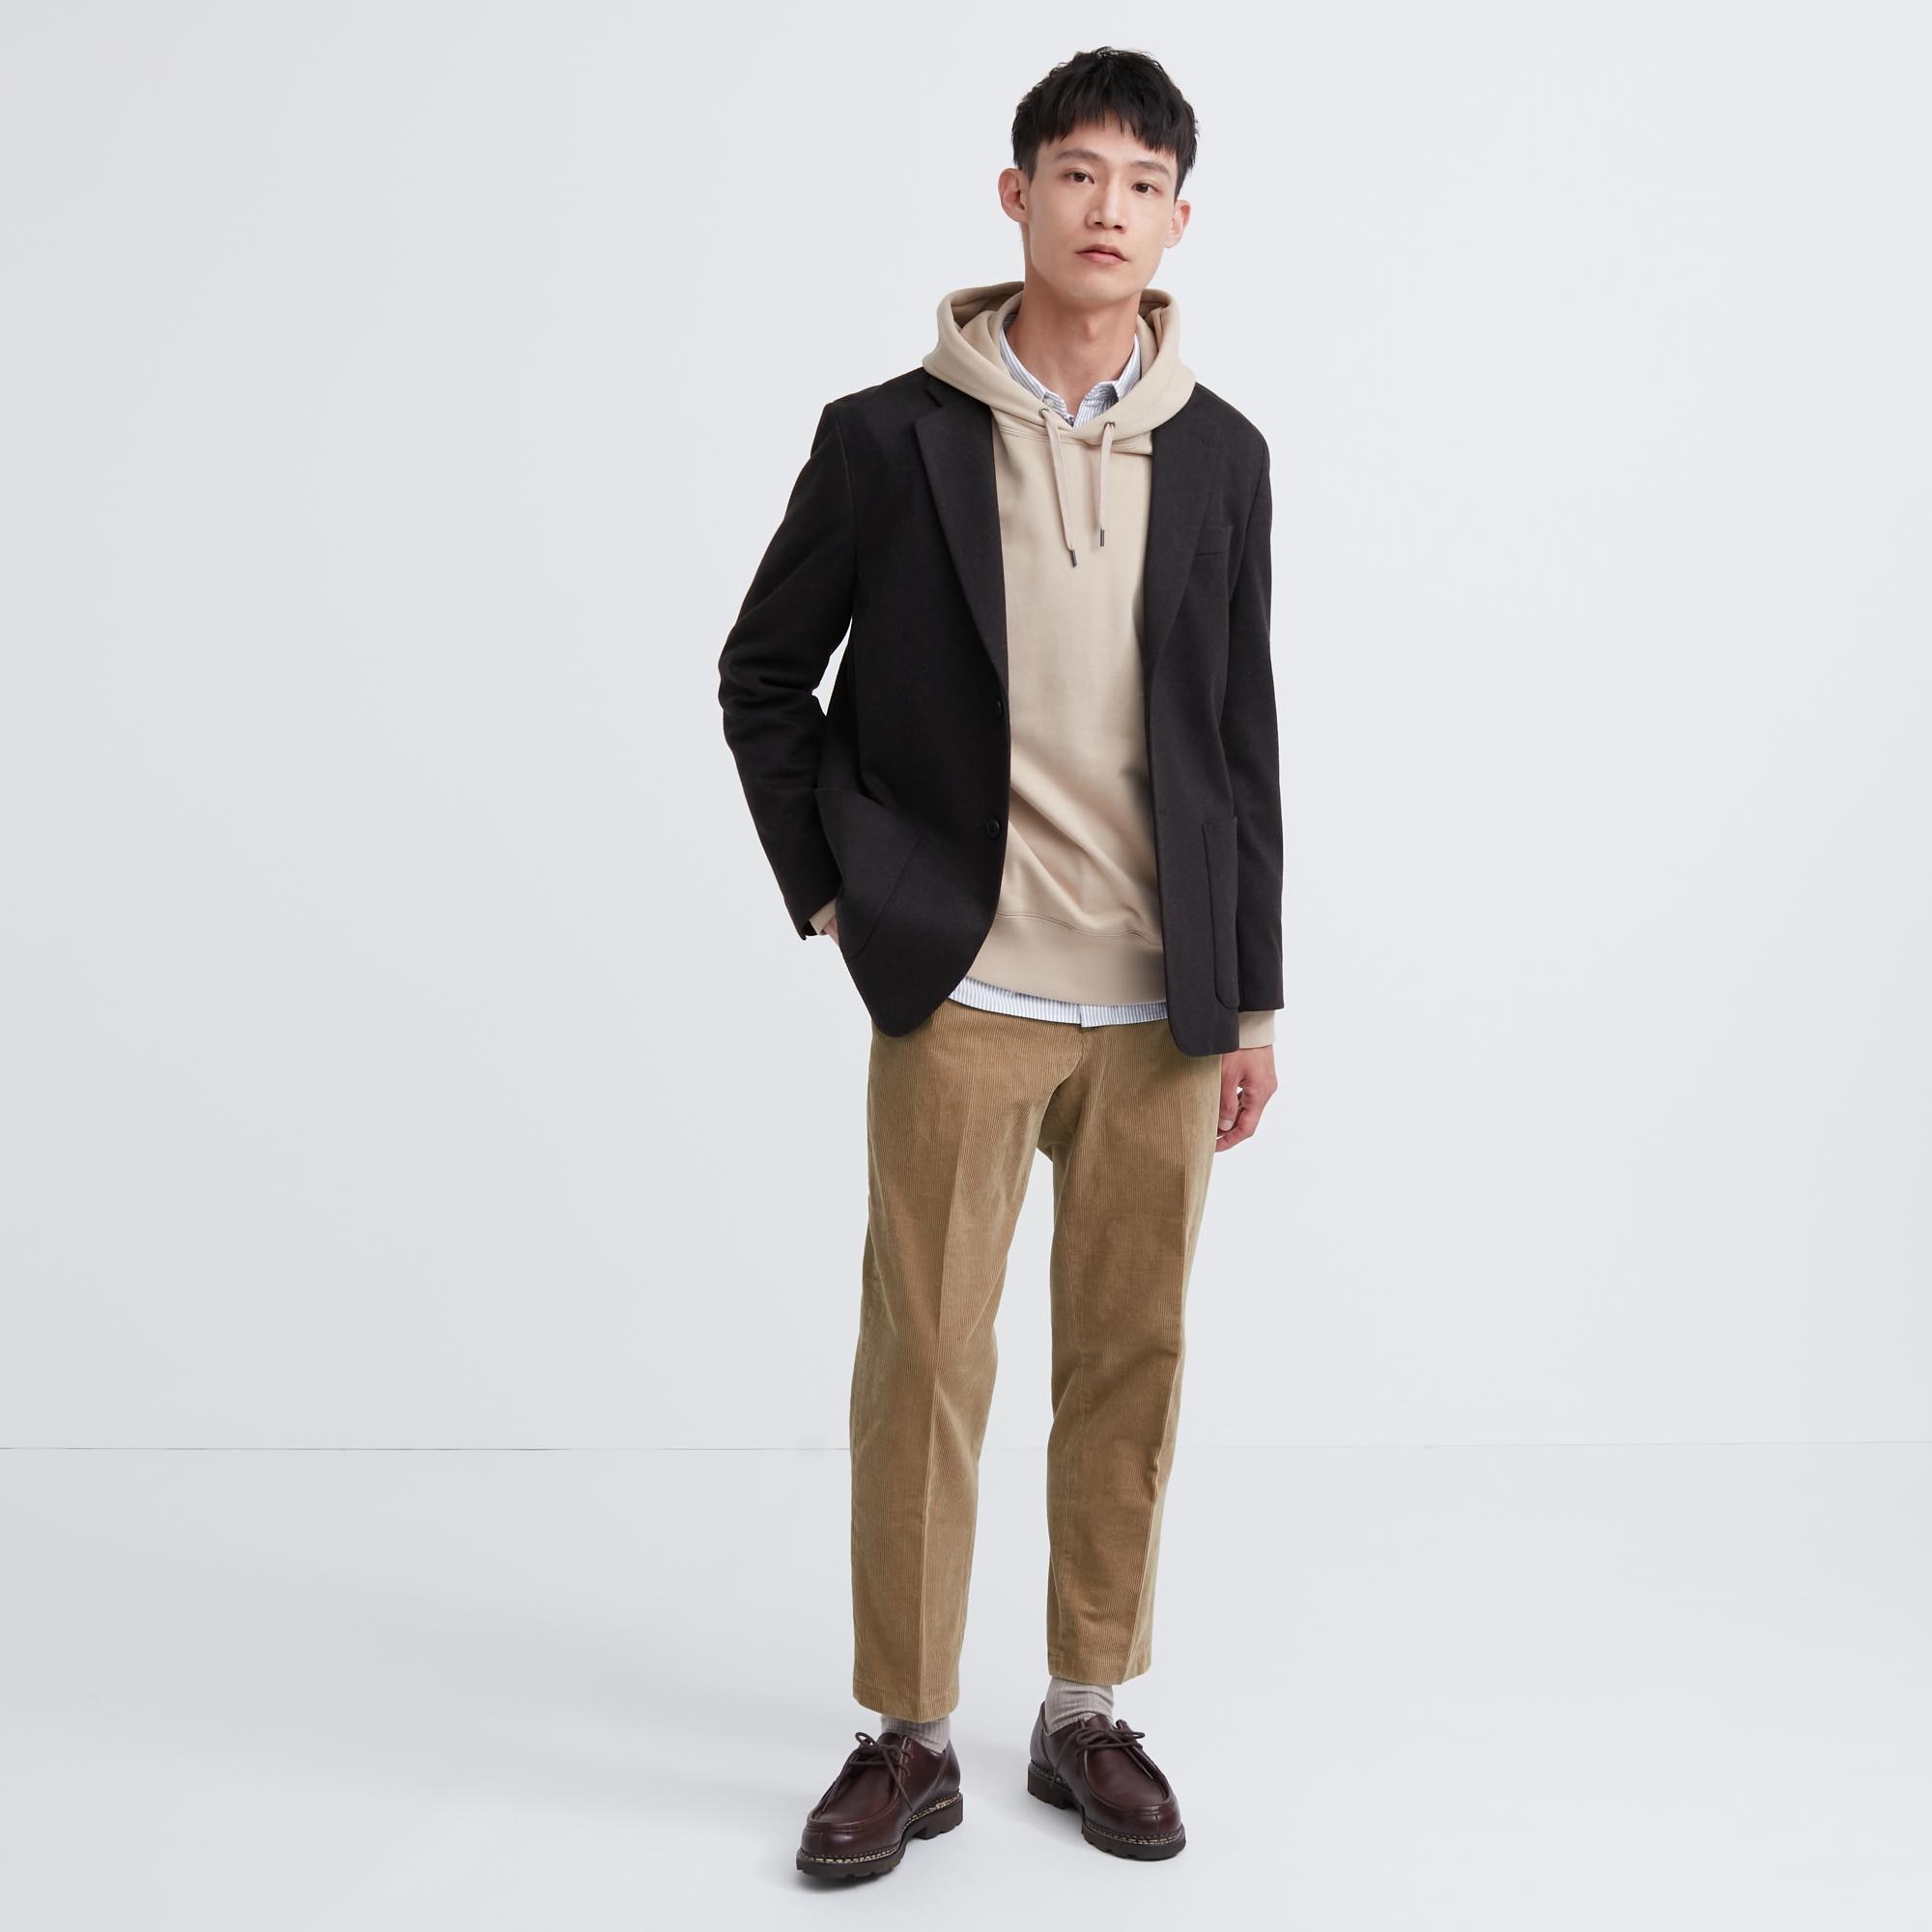 Corduroy Relaxed Fit Ankle Length Trousers